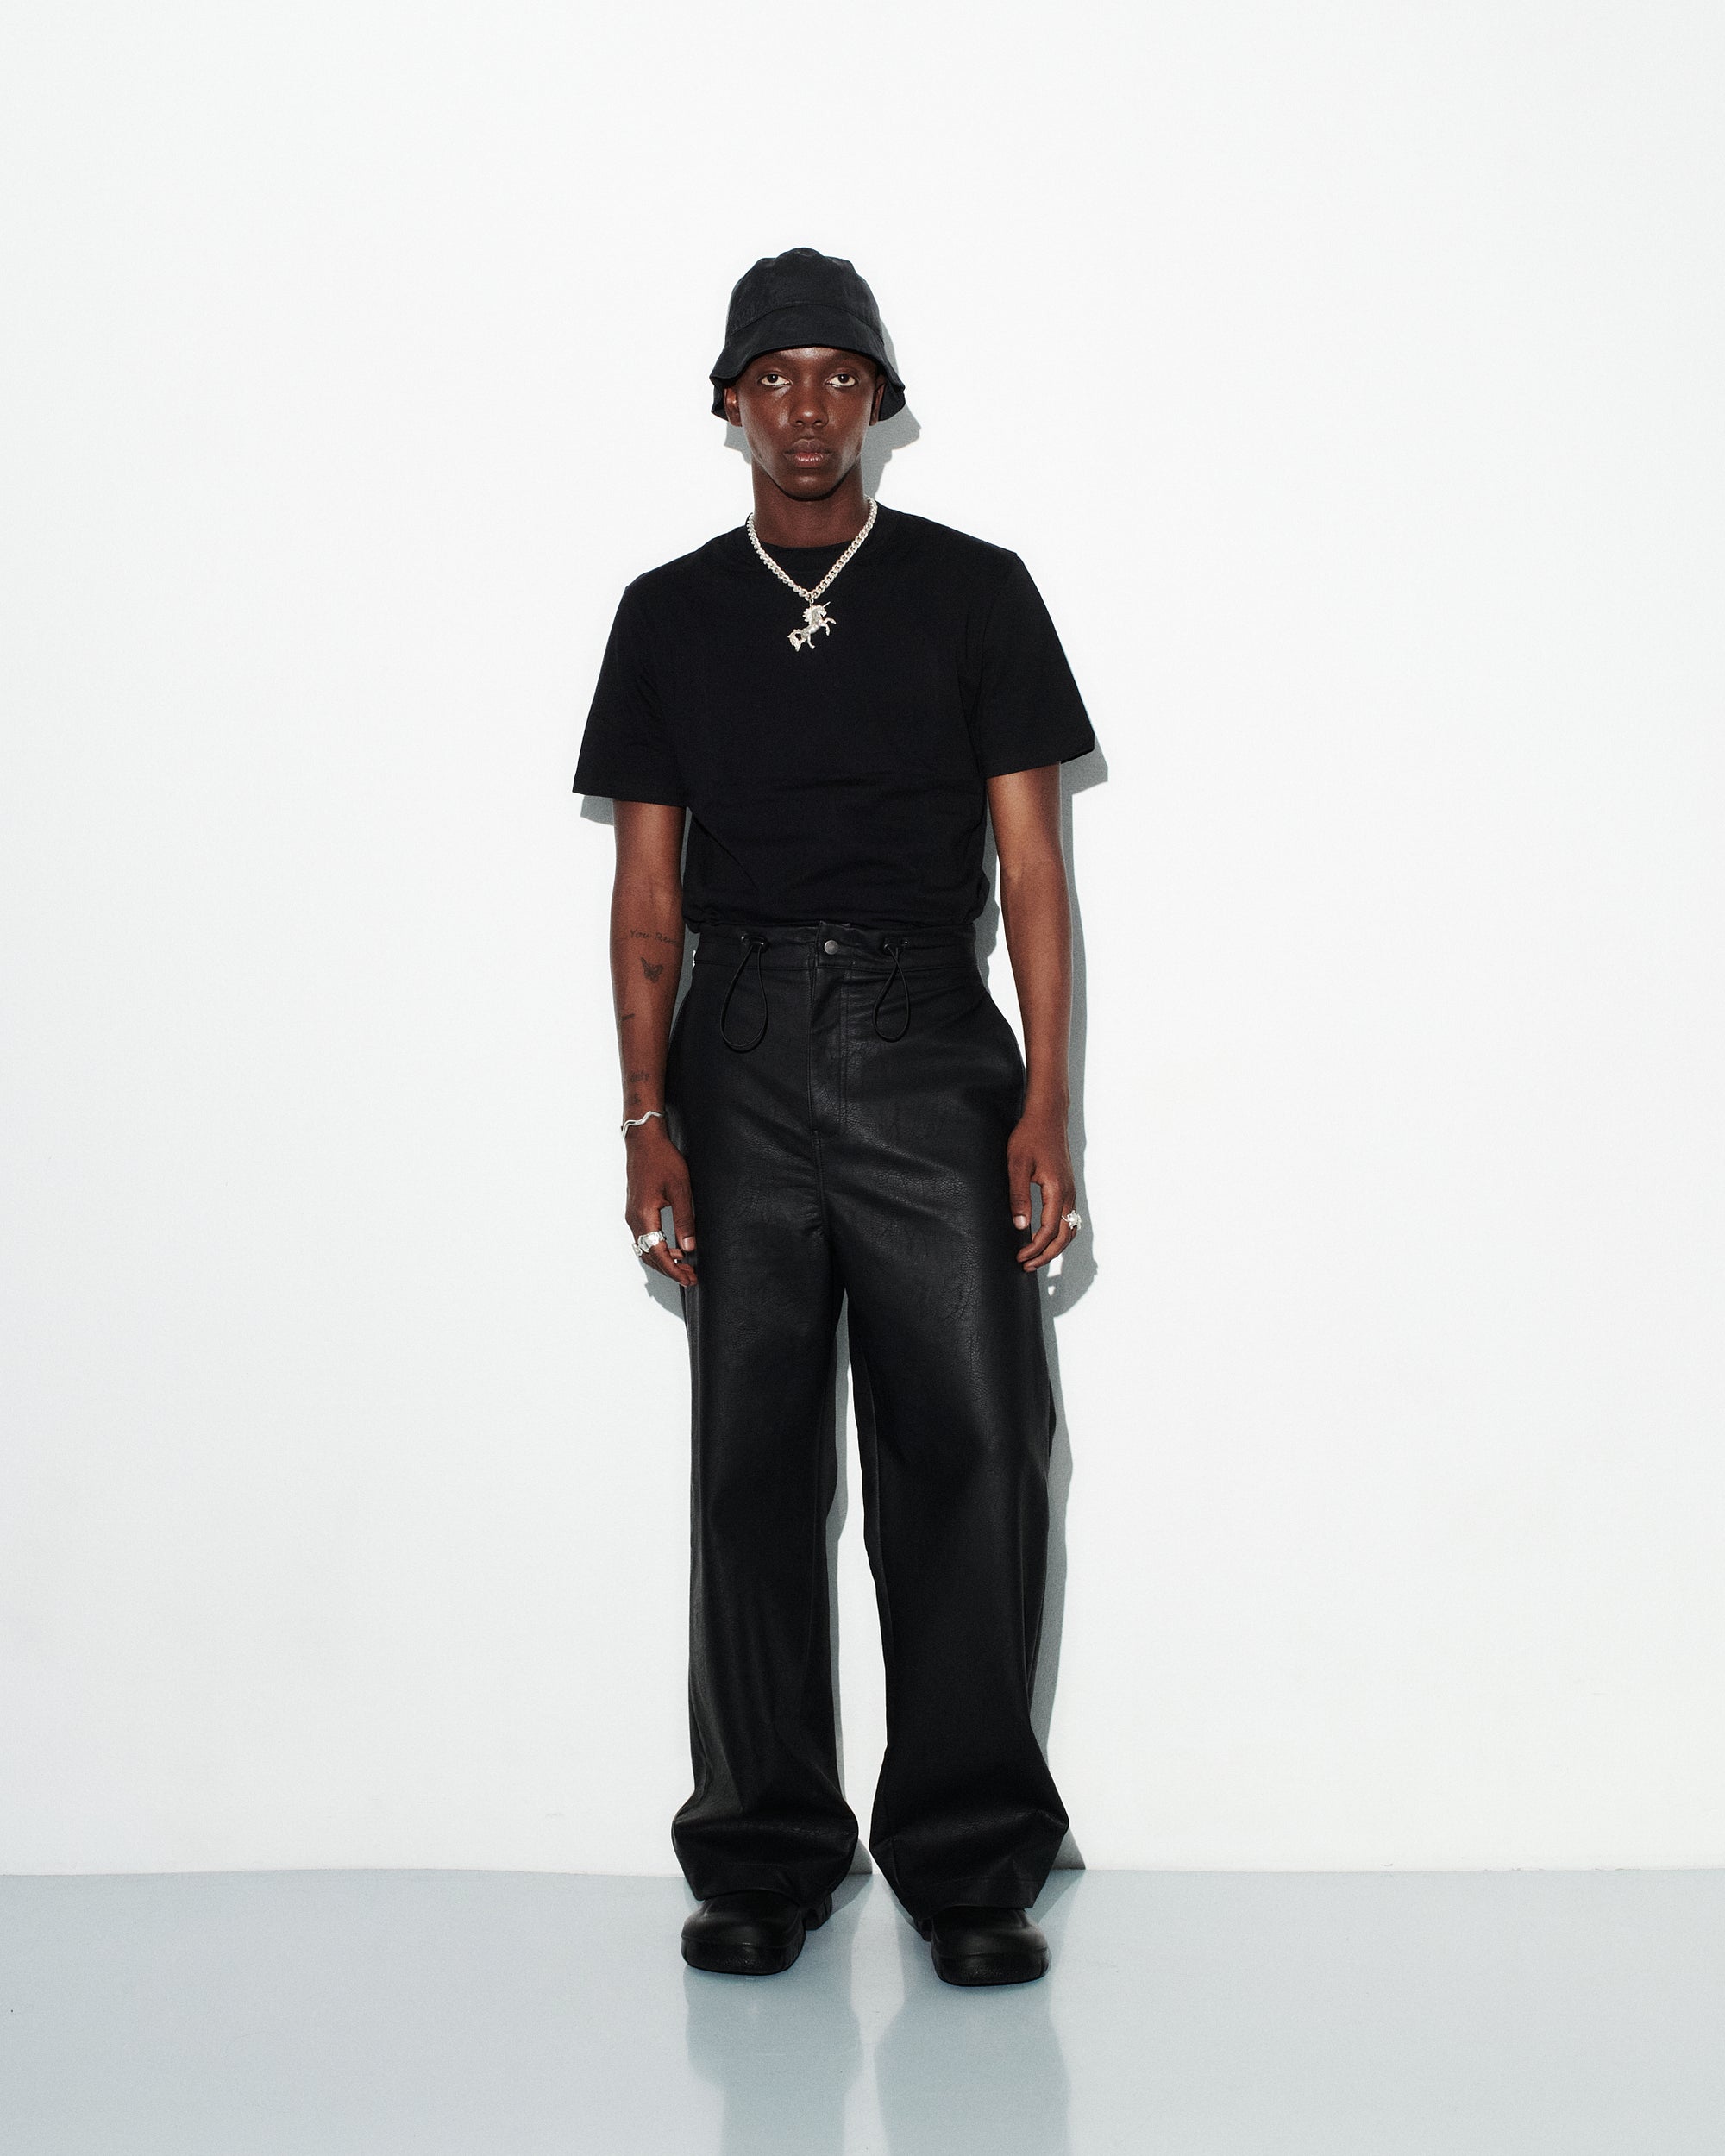 BLOUSSON LEATHER TROUSERS